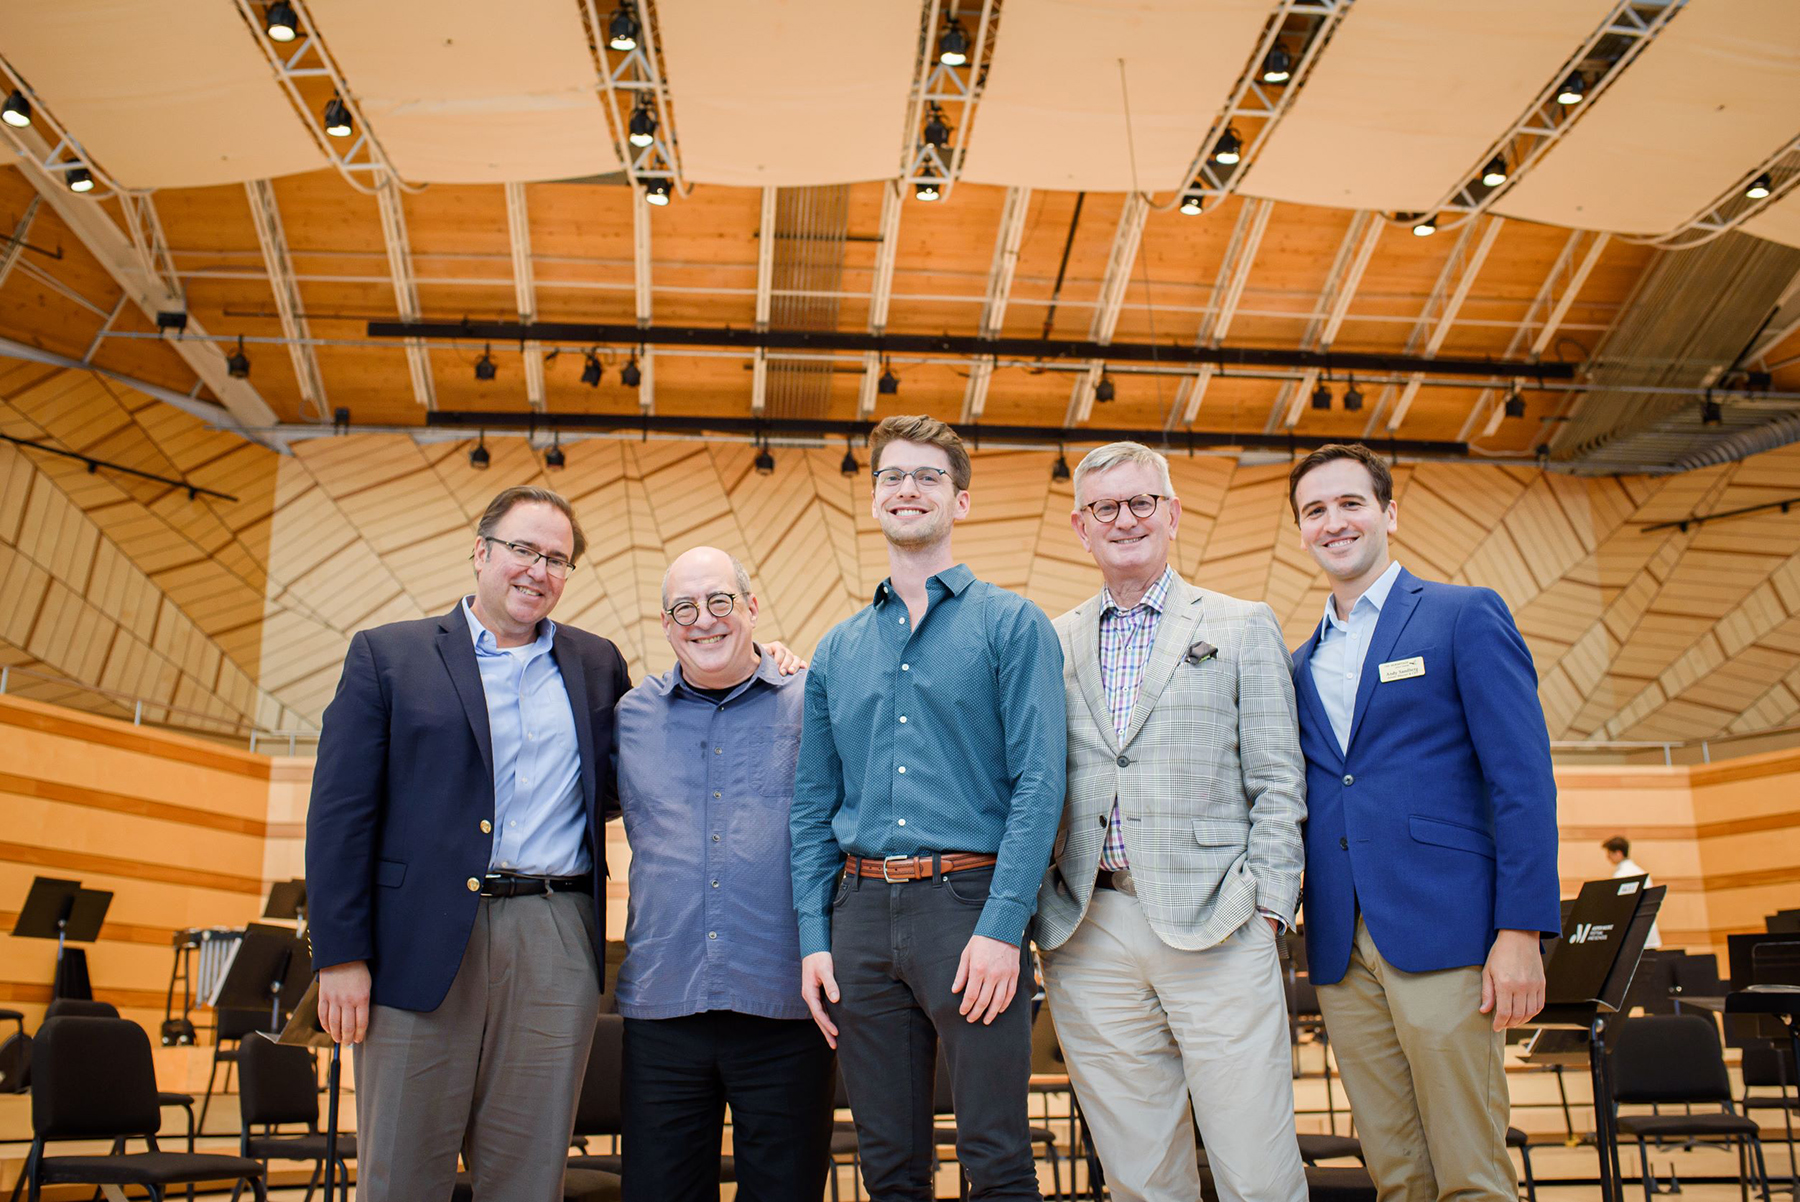 The Aspen Musical Festival’s Benedict Tent (Aspen, Colorado): L to R: Christopher Theofanidis, Hermitage Fellow and Aspen Music Festival and School artist-faculty; Robert Spano, music director of the Aspen Music Festival and School and the Atlanta Symphony and a member of the Hermitage Curatorial Council; David “Clay” Mettens, recipient of the 2021 Hermitage Prize in Composition; Alan Fletcher, Aspen Music Festival and School president and CEO; and Andy Sandberg, artistic director and CEO of the Hermitage Artist Retreat. Photo Credit: Carlin Ma